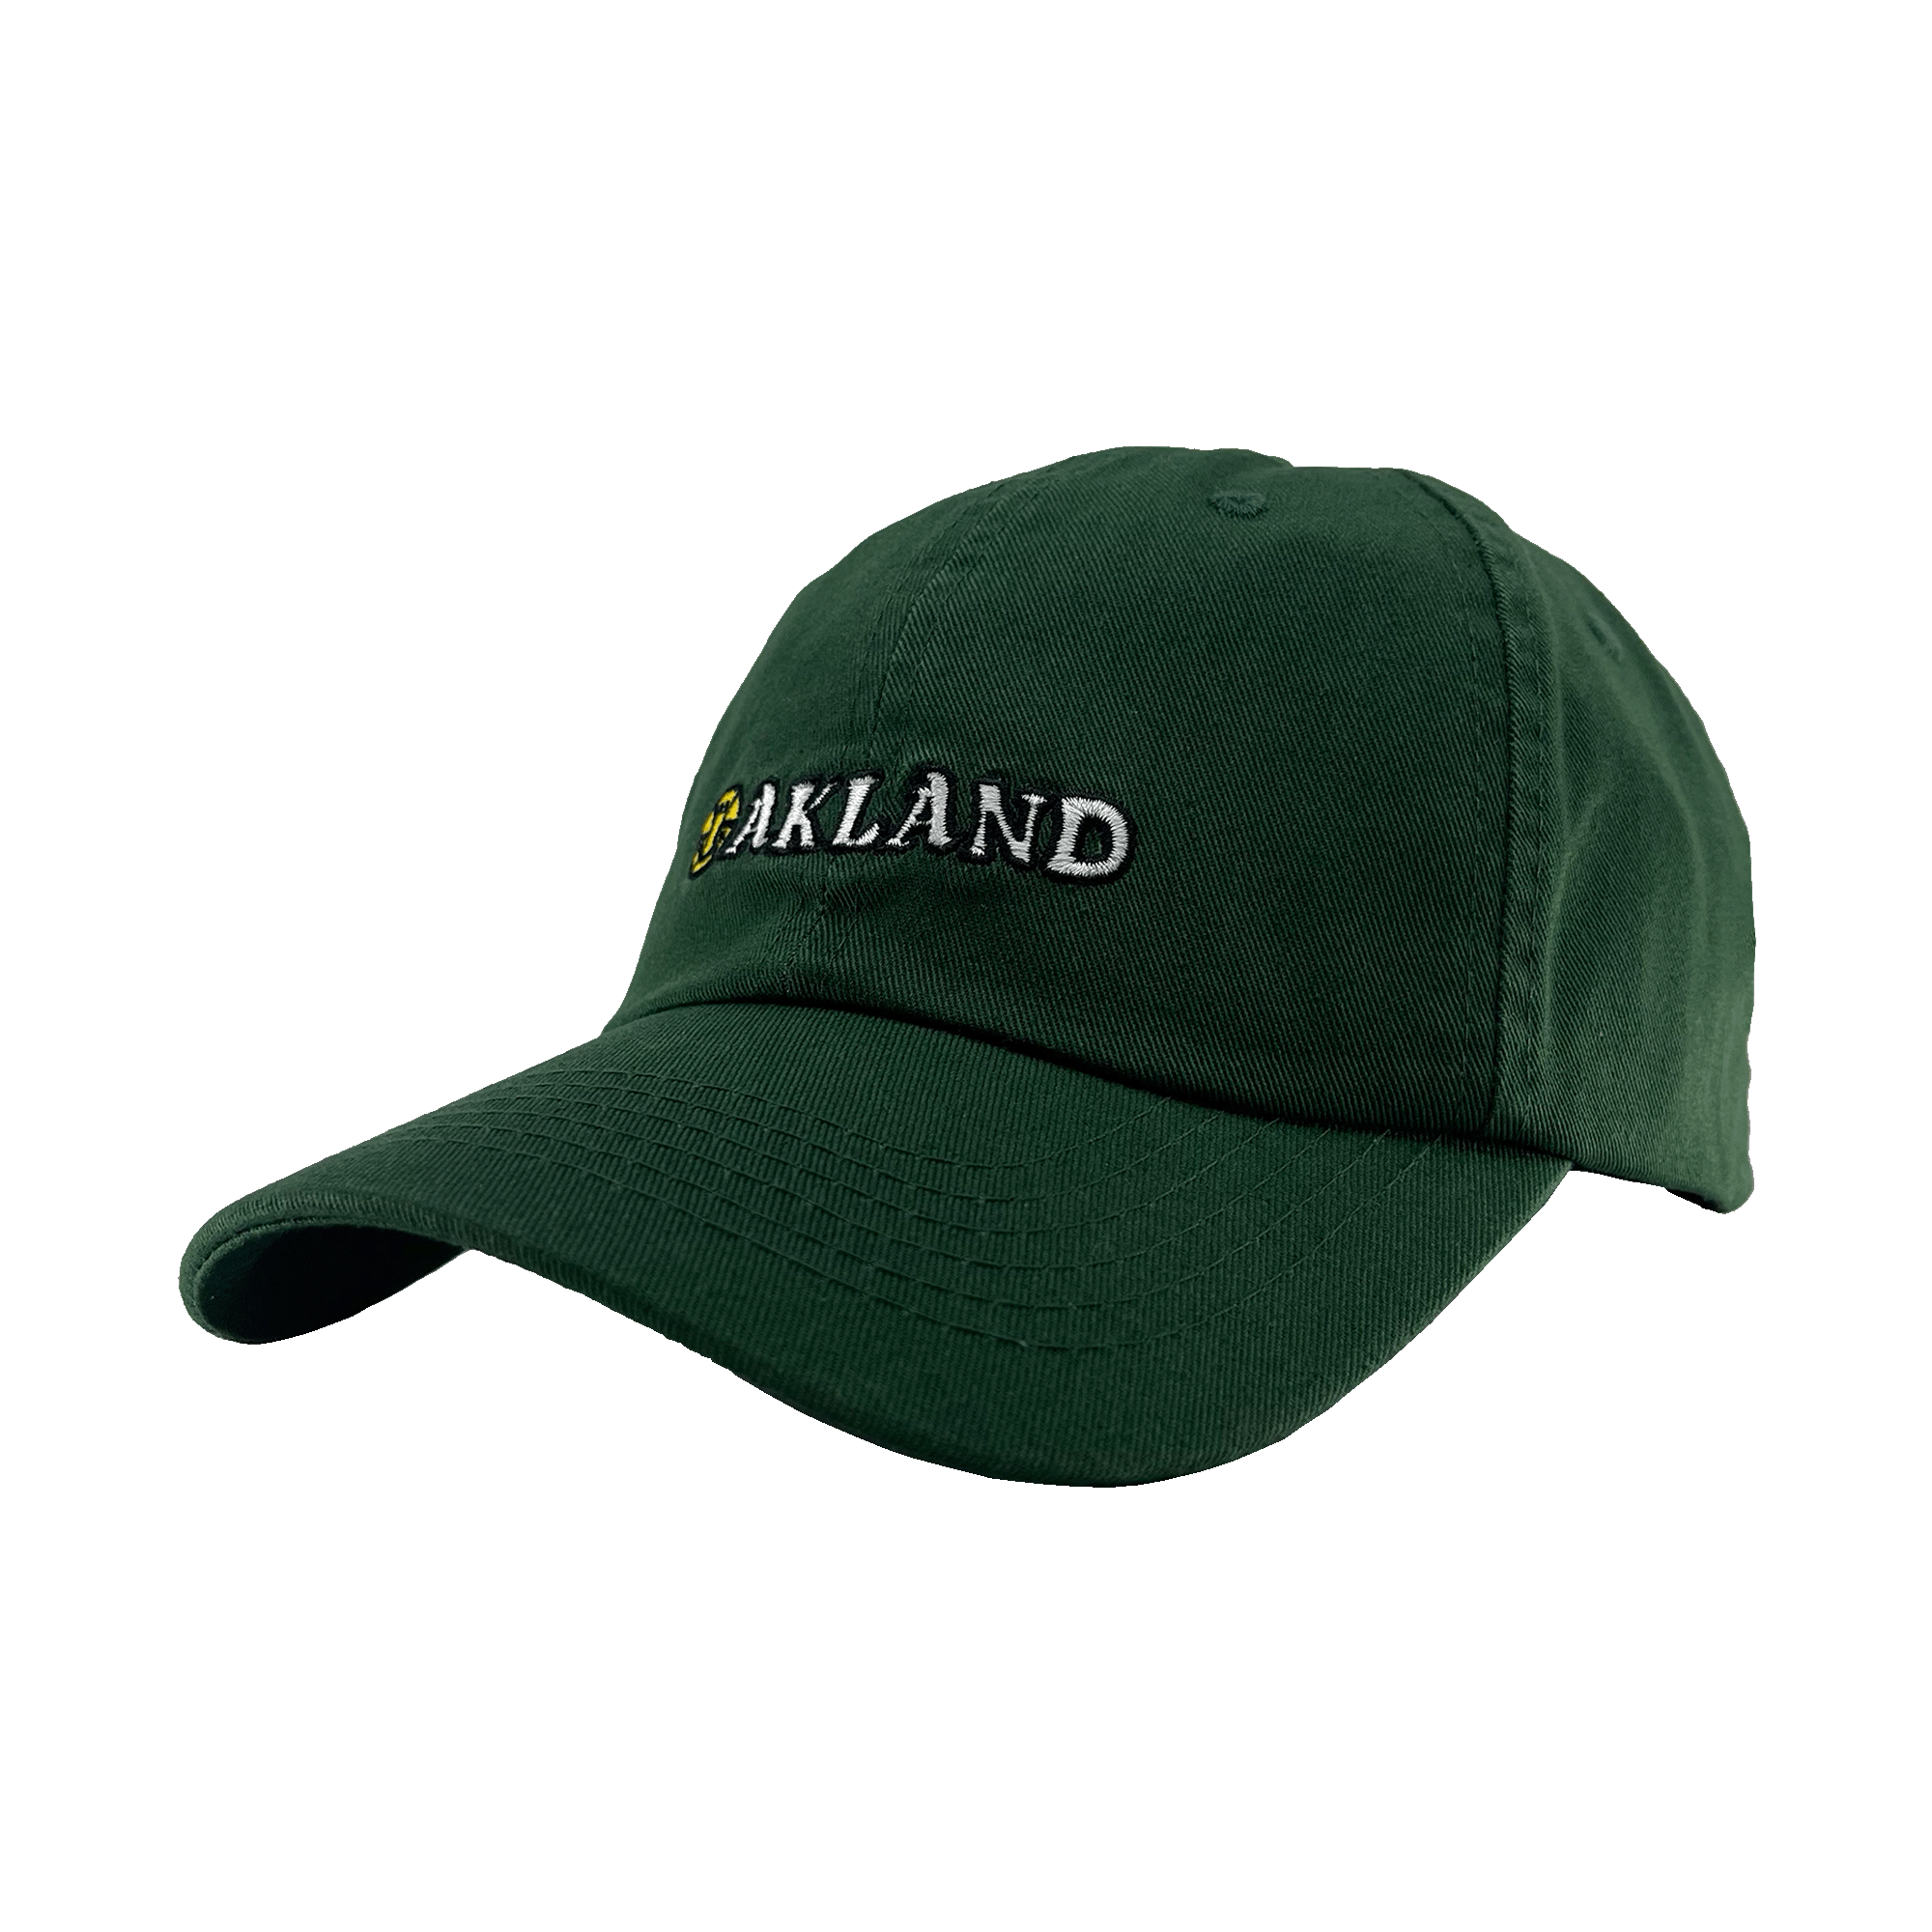 Angled side view of green Oakland Dad Hat, with embroidered design by Dustin O. Canalin (DOC).